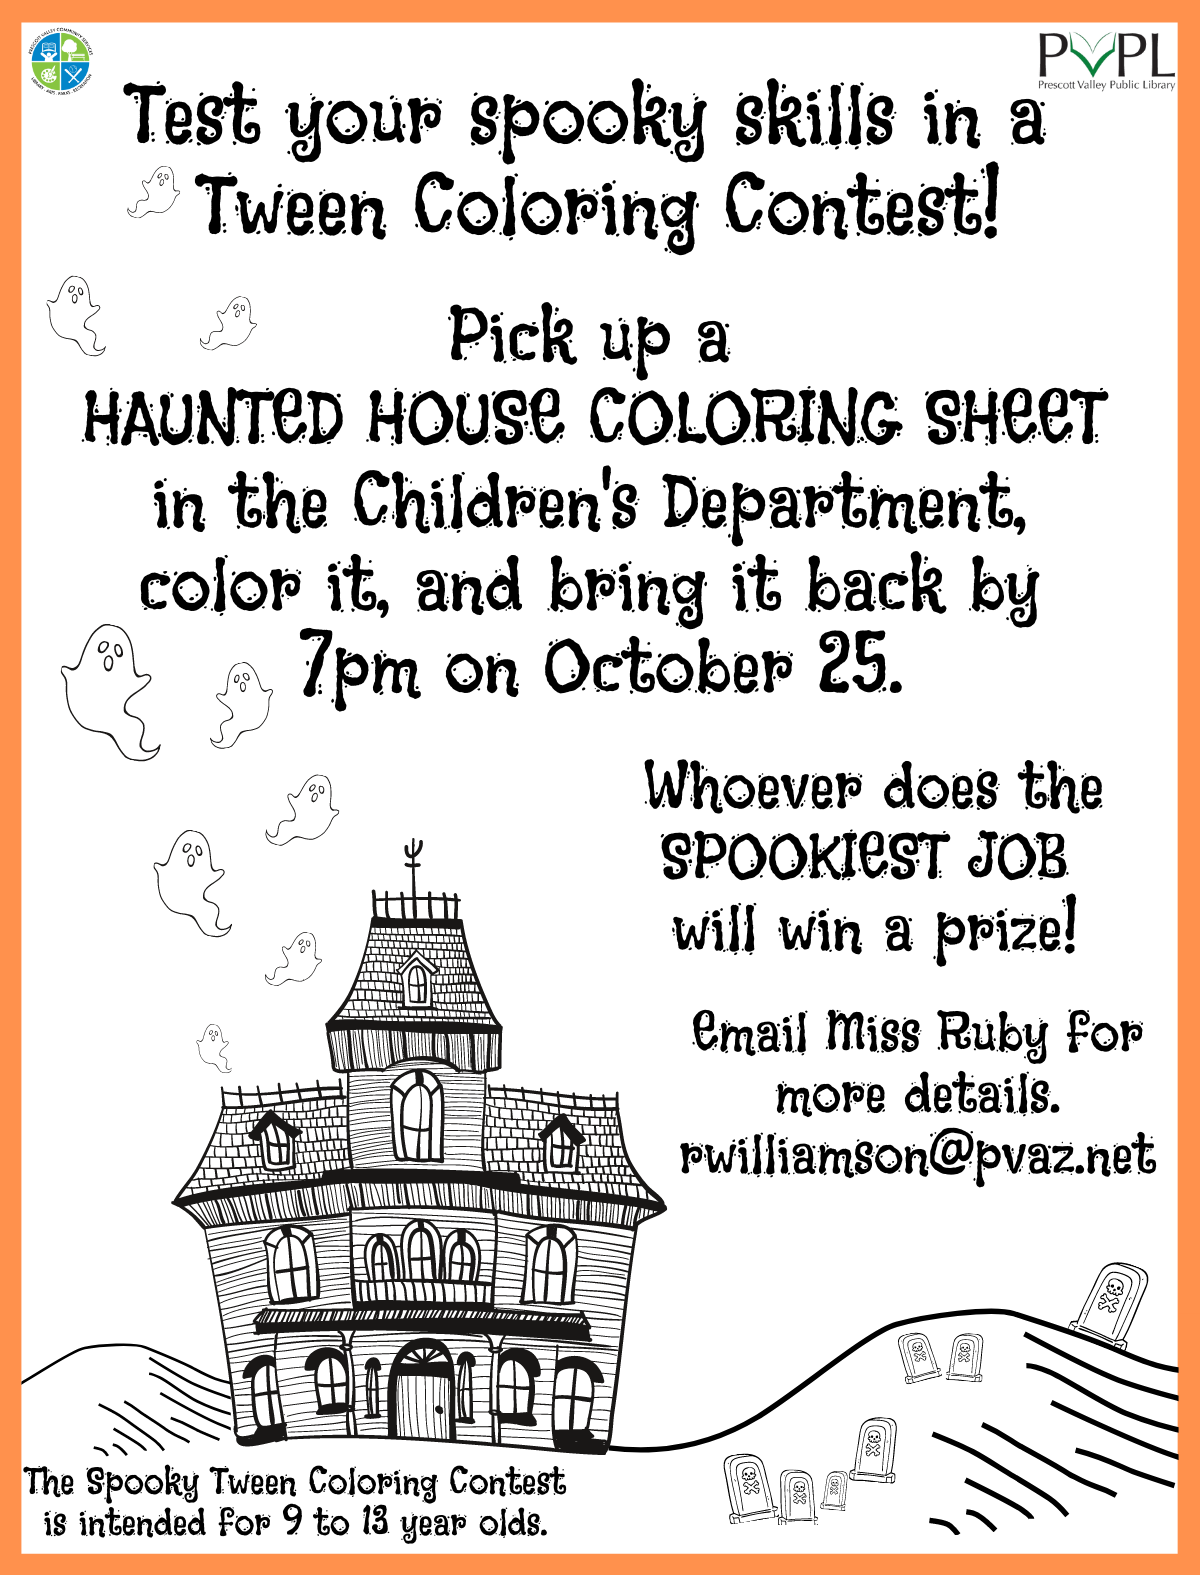 The Spooky Coloring Contest runs until 7pm on Oct 25. Pick up a coloring sheet in the Children's Department today!